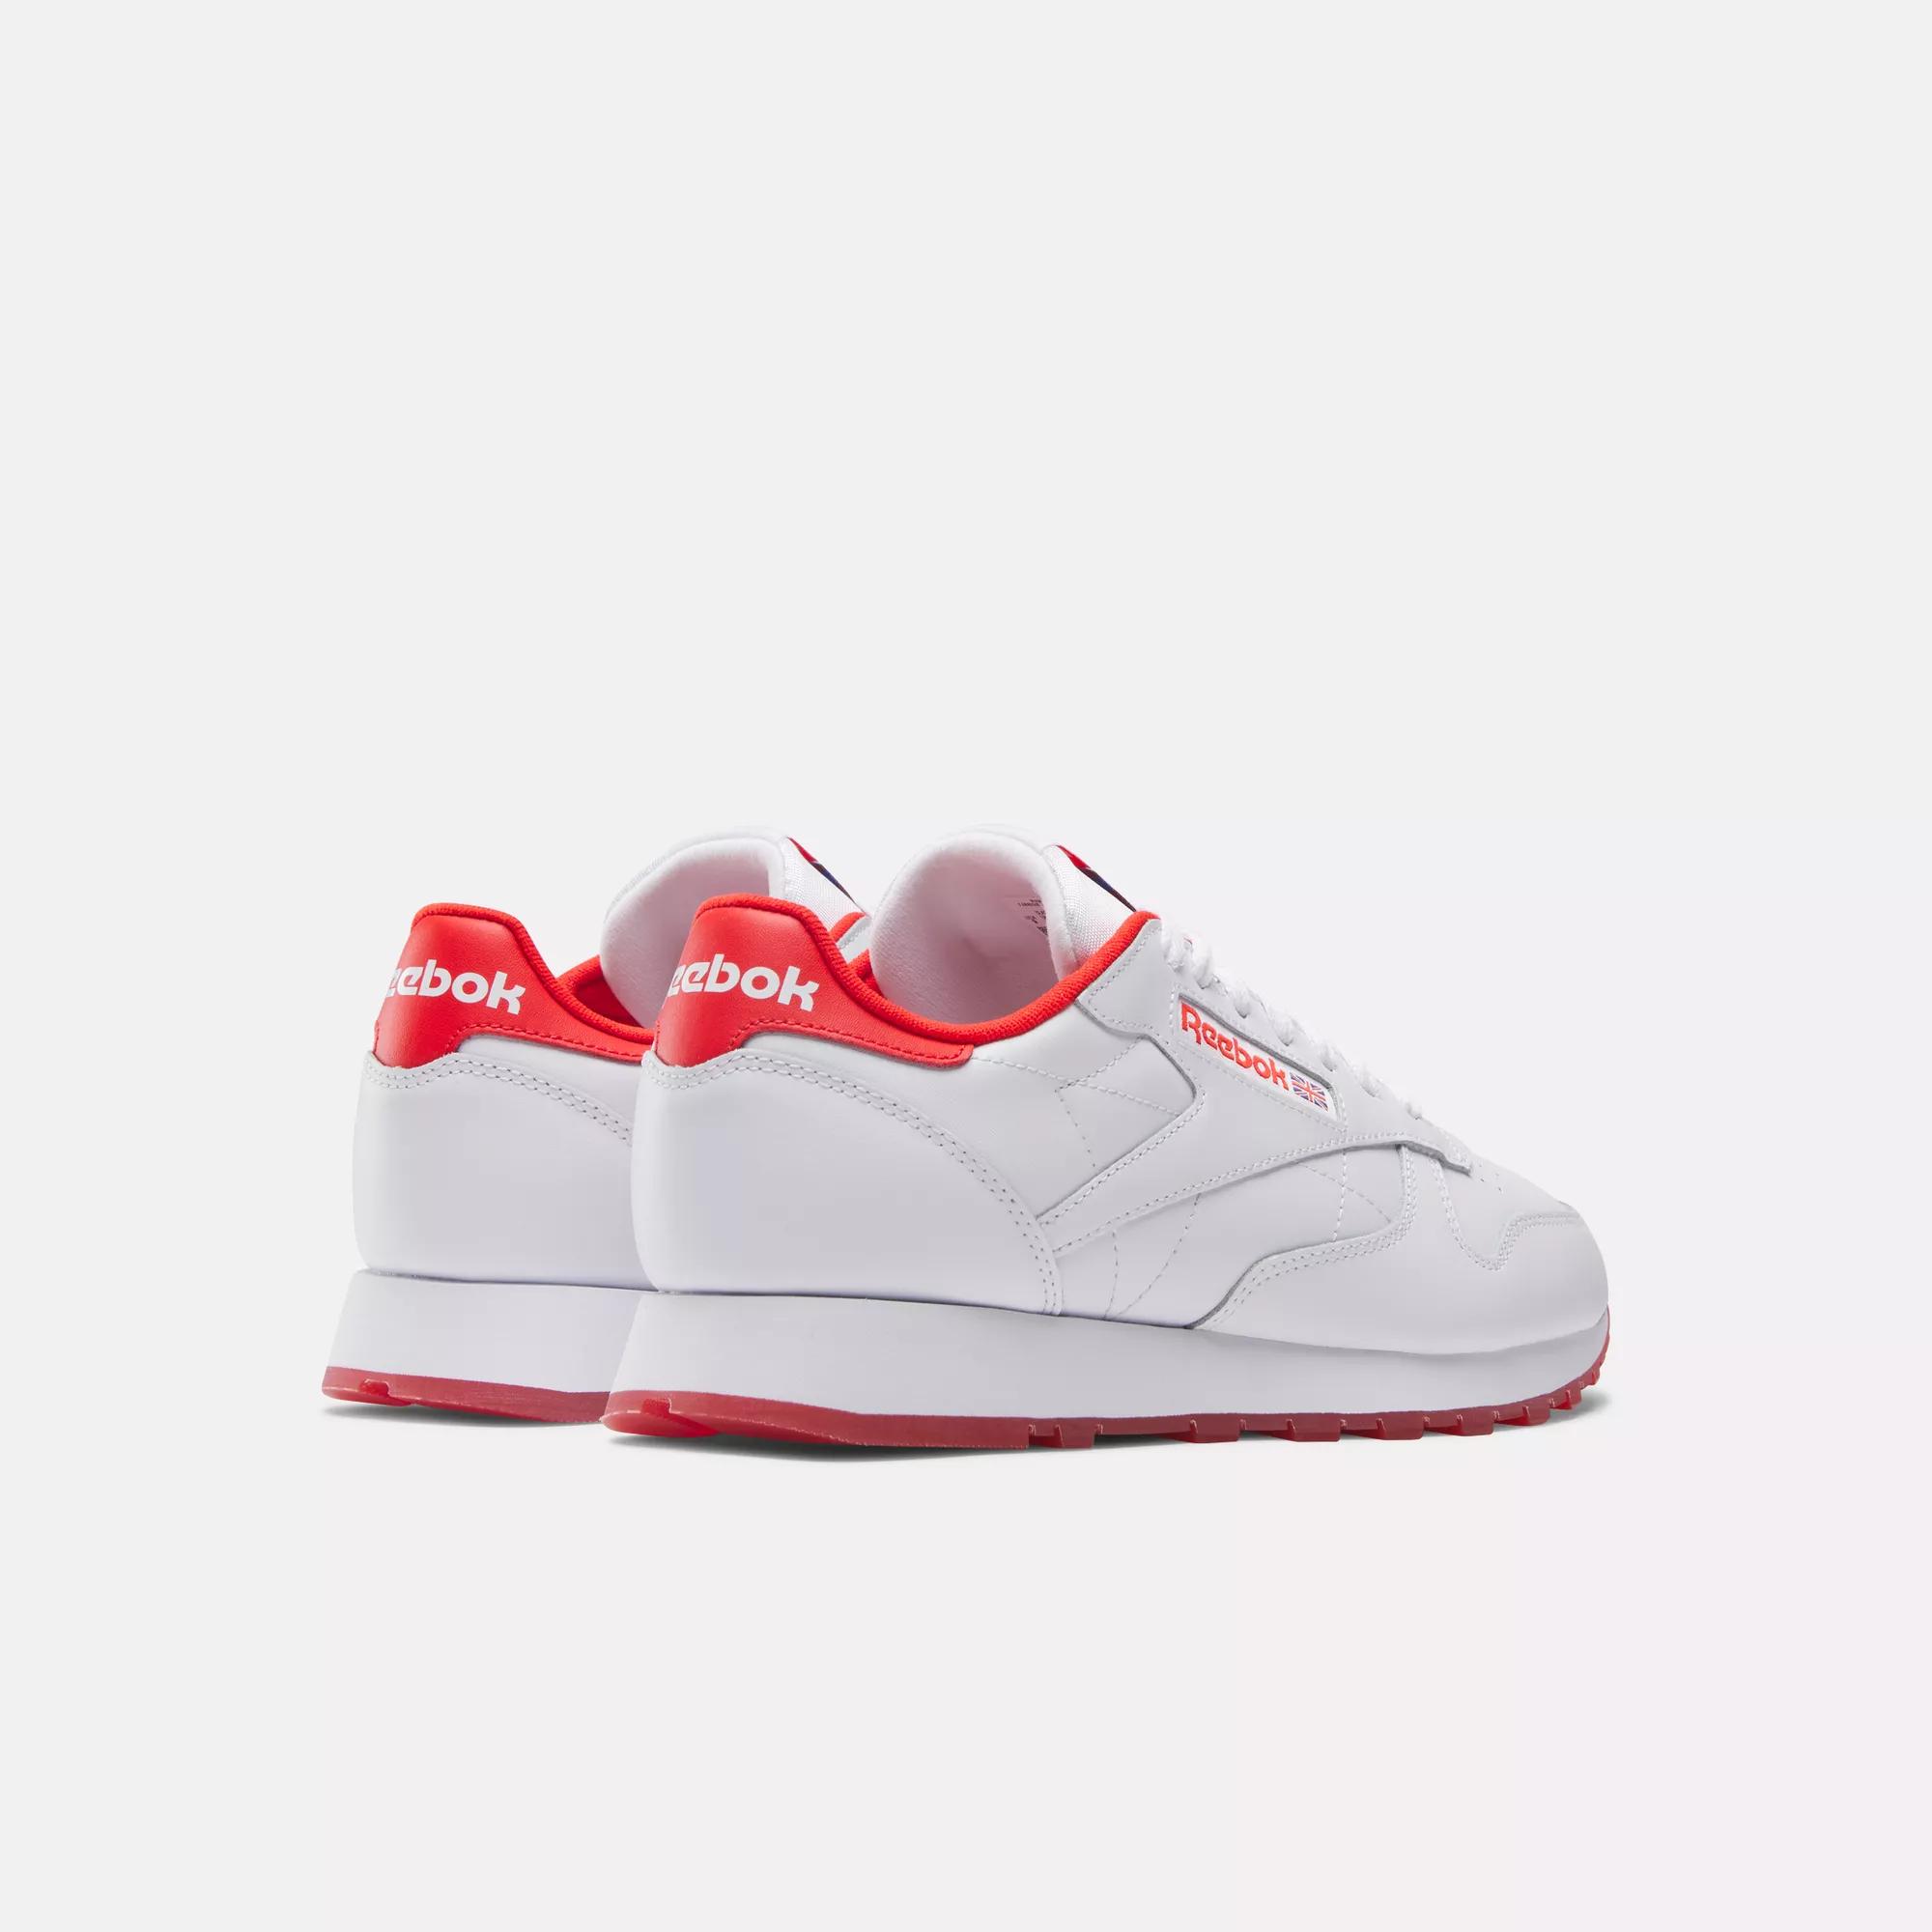 Classic Leather Ice Shoes - White / White / Instinct Red | Reebok